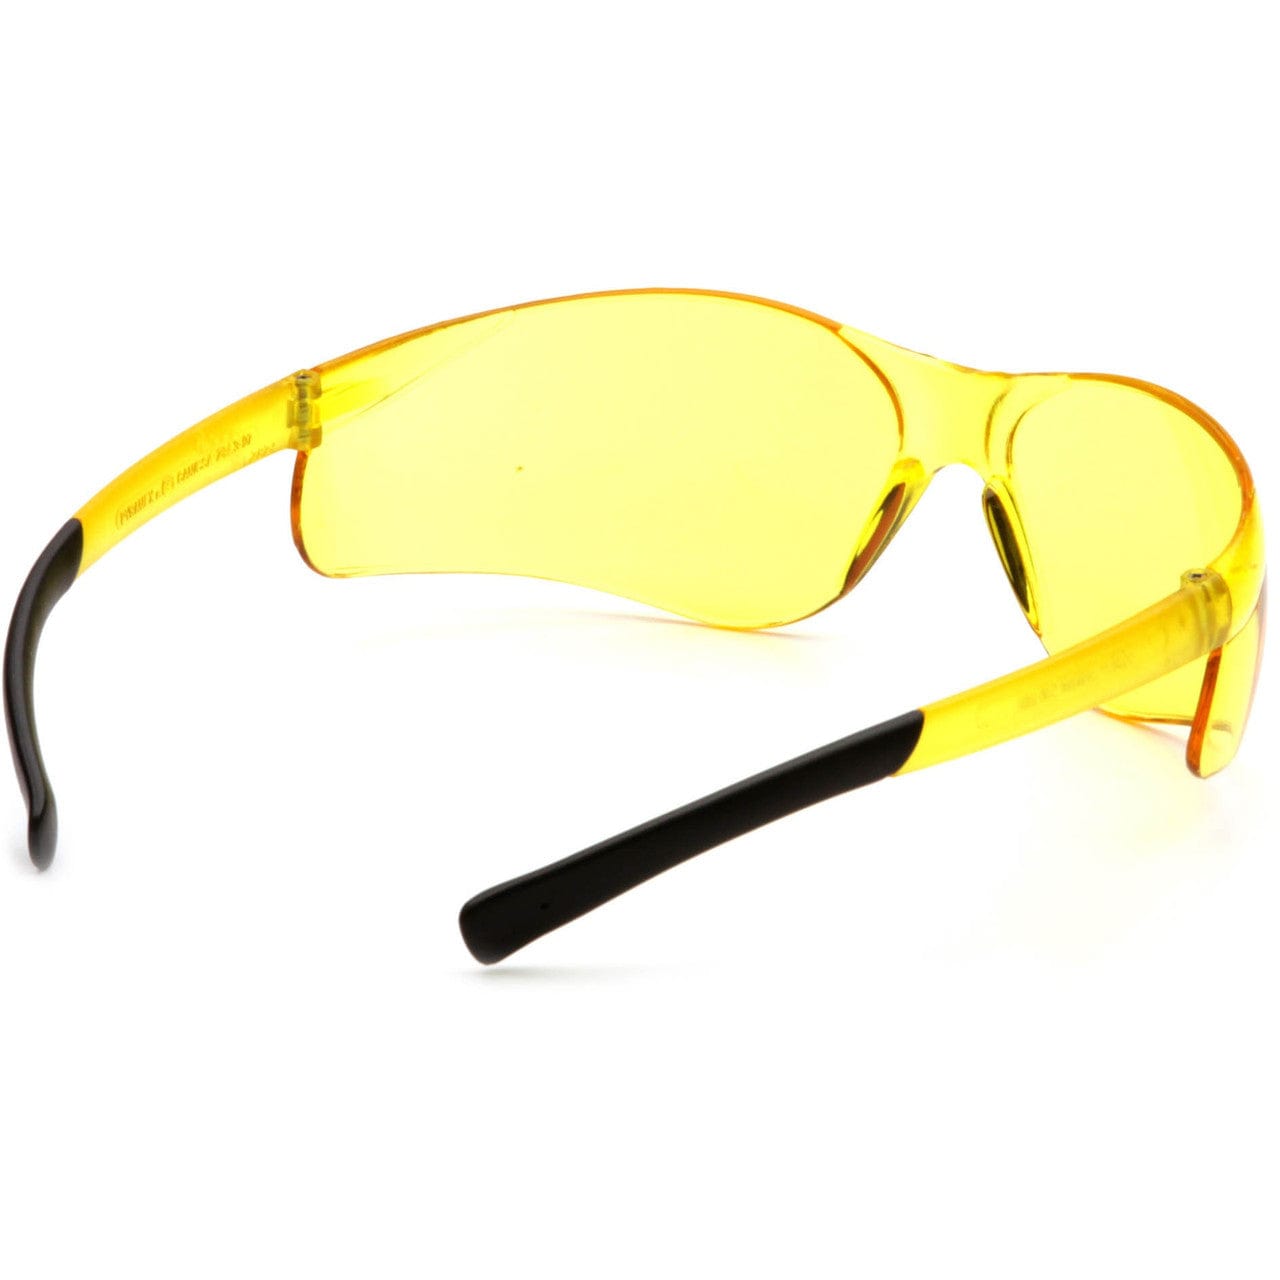 Pyramex Ztek Safety Glasses with Amber Lens S2530S Inside View